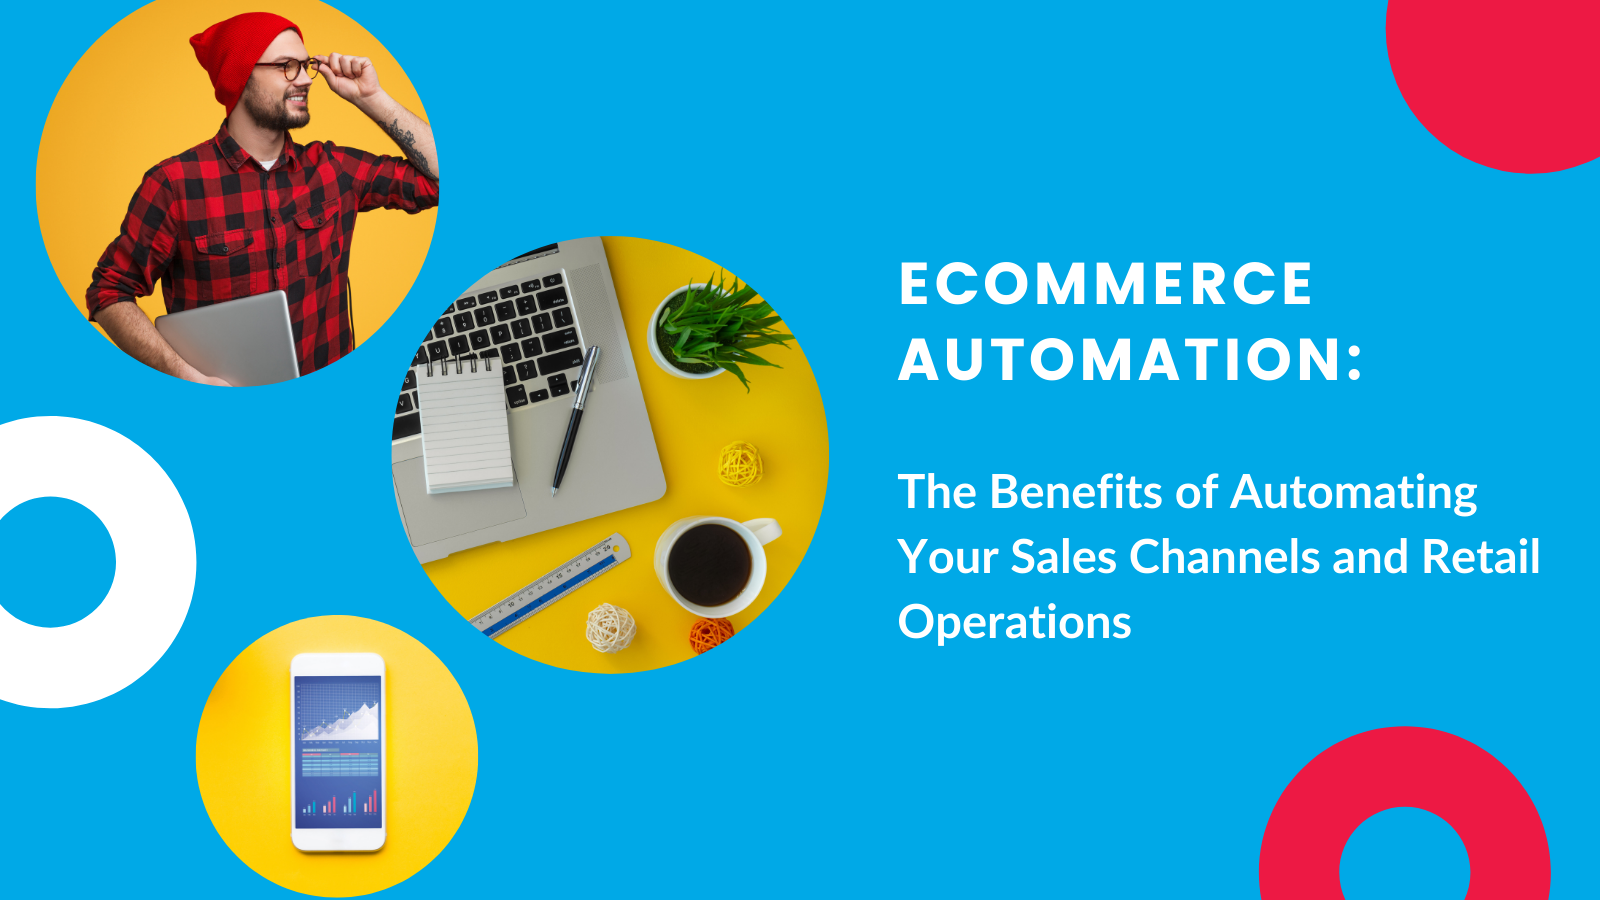 Ecommerce Automation: 4 Reasons Why You Need It To Scale